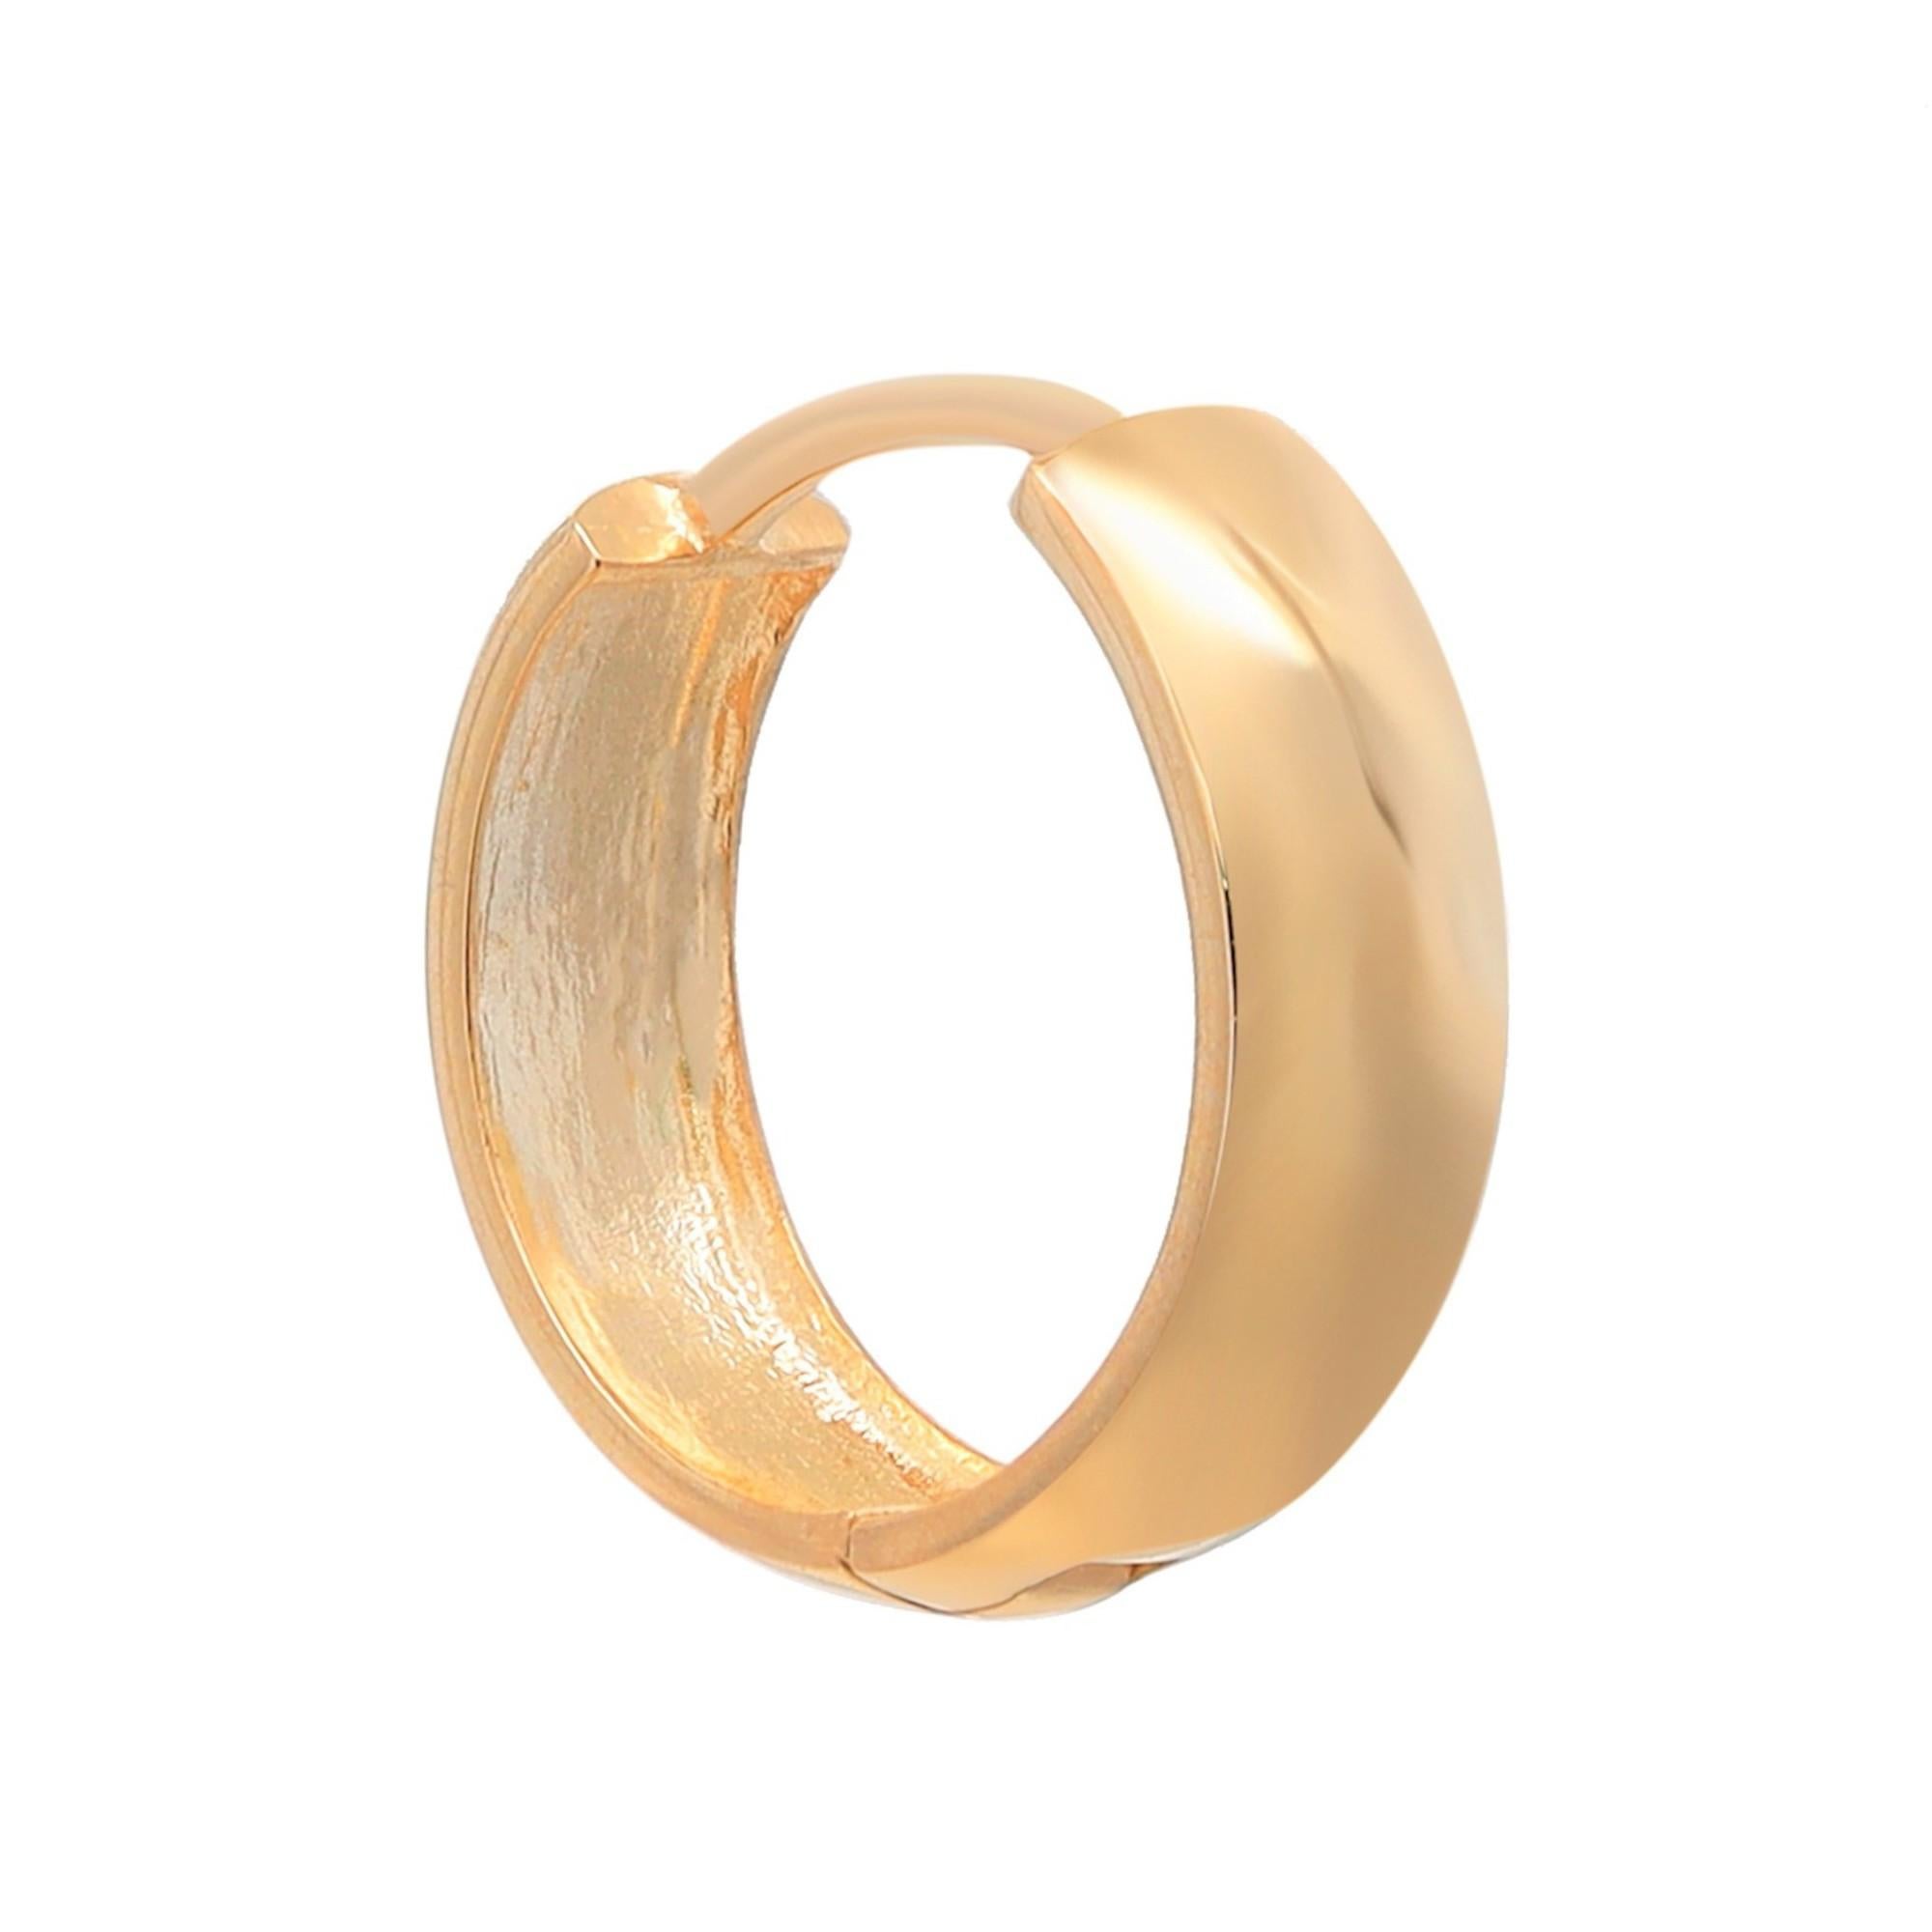 Simple, elegant yet classic, these huggie earrings are perfect for a great everyday look. Crafted in highly polished 14k yellow gold. Secured with hinged body design for easy wear. Earring length: 14mm. Width: 4.3mm. Total weight: 1.80 grams. Ideal